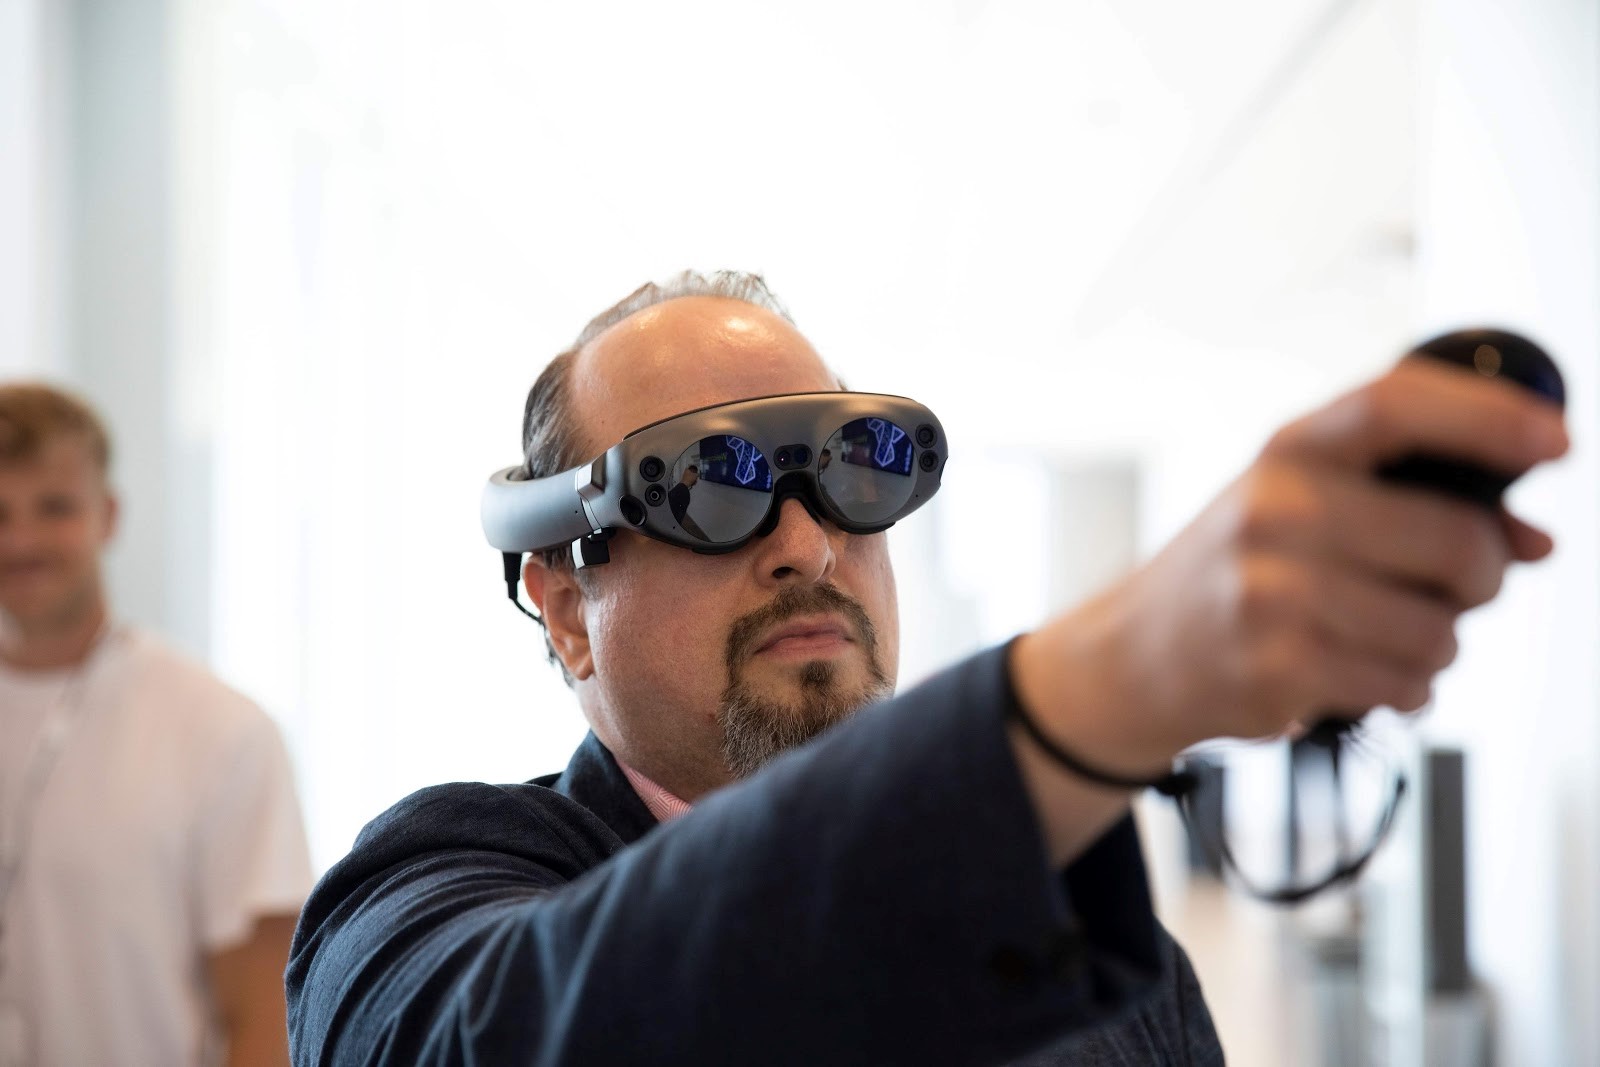 Bill Curtis-Davidson (former Accessibility Leader at Magic Leap) points a 6DoF controller while wearing a Magic Leap 1 spatial computing device during the 2019 XR Access Symposium in New York, July 2019.